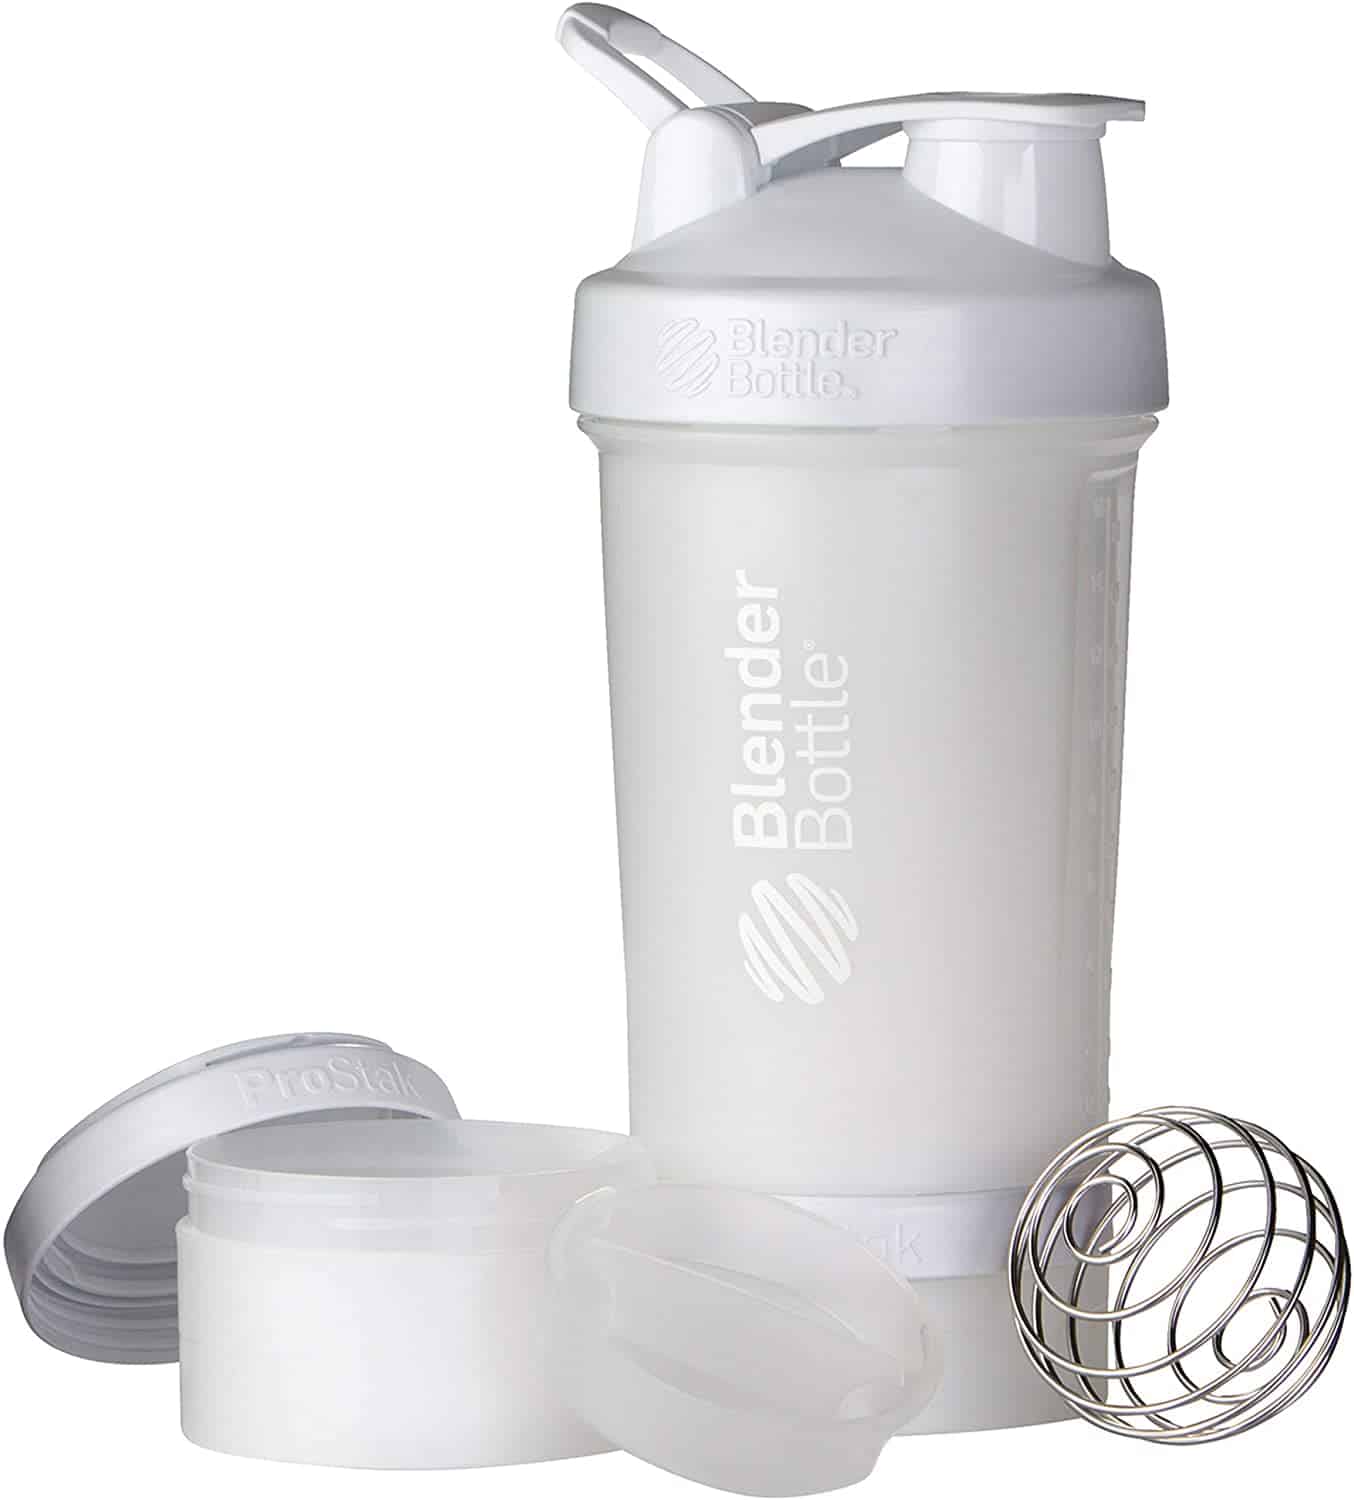 Shaker Bottle with Whisk Ball Blender by Netrition by Netrition - Exclusive  Offer at $4.99 on Netrition